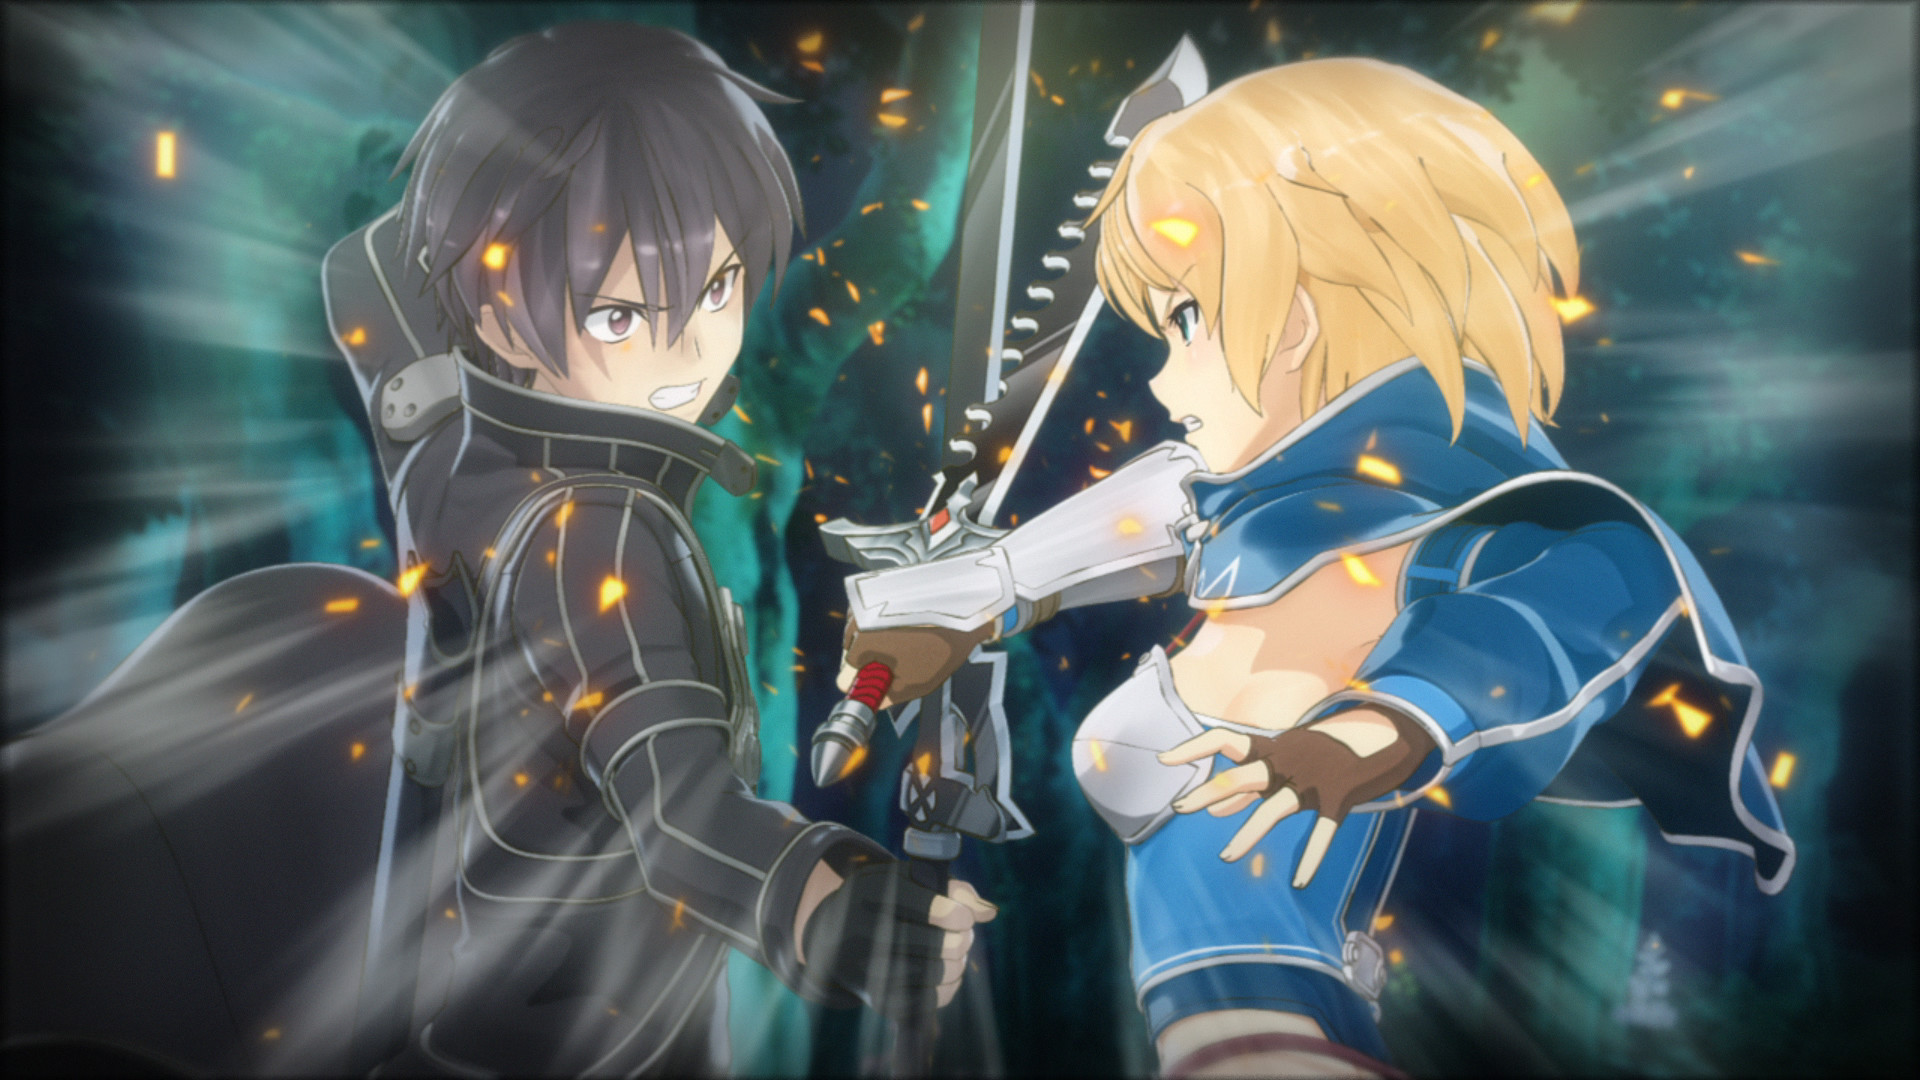 1920x1080 Back into the Game | Sword Art Online Re: Hollow Fragment Review